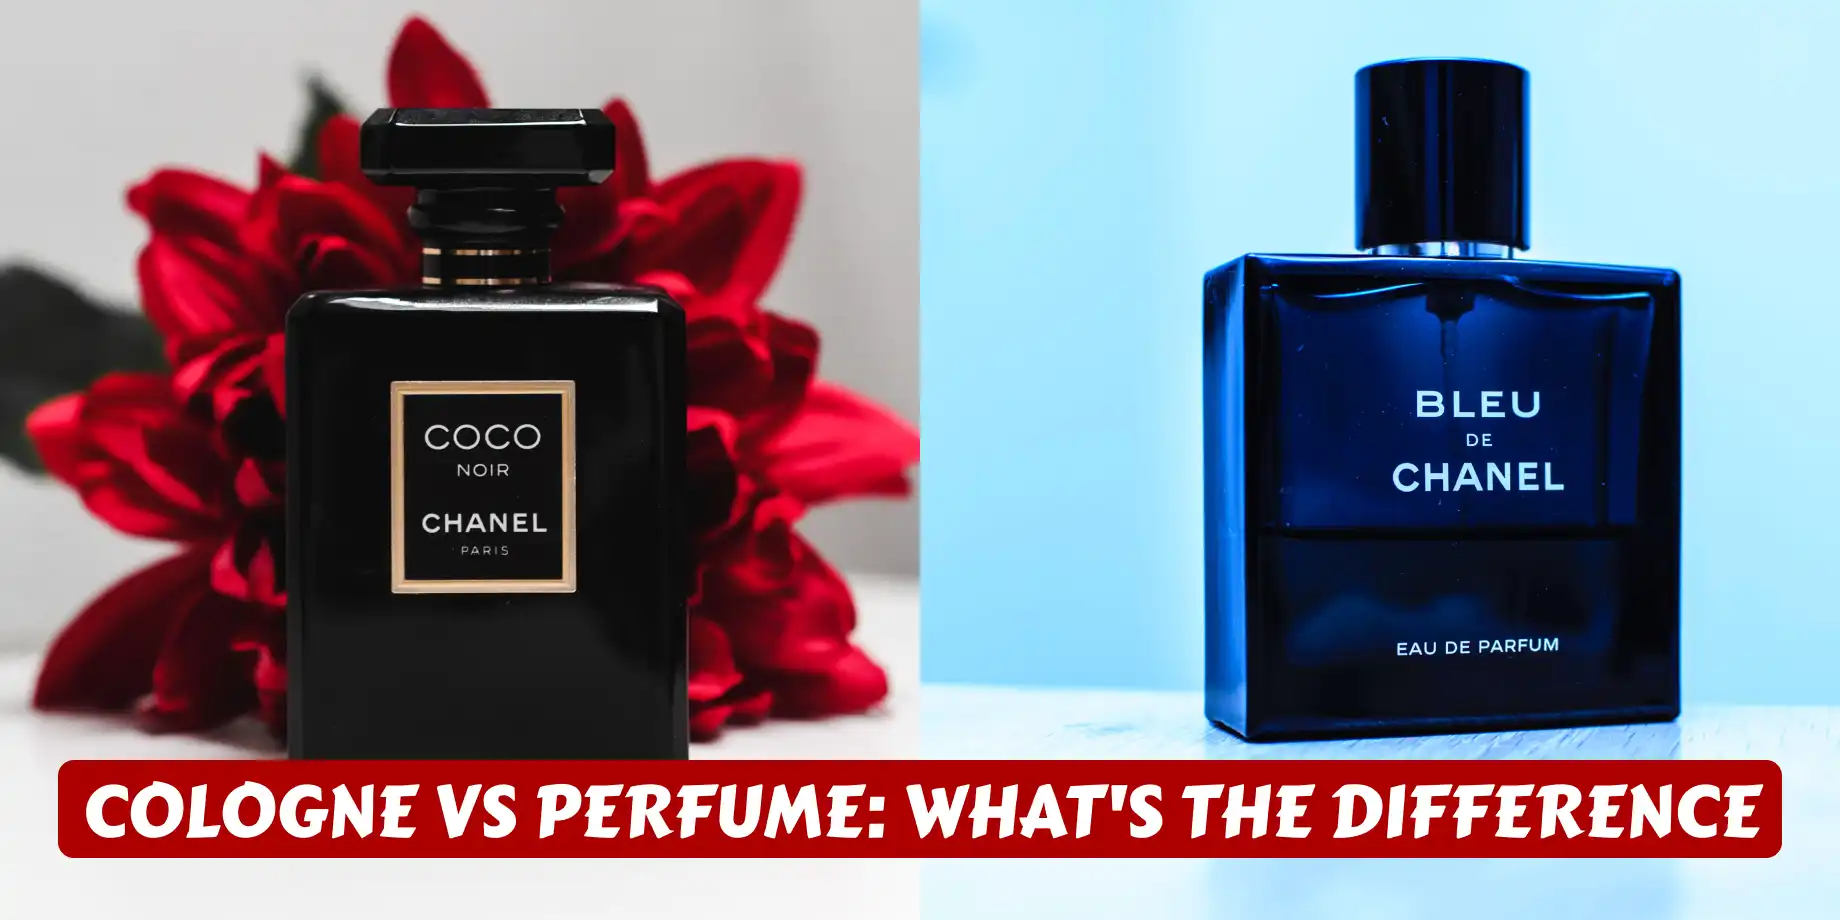 Cologne vs Perfume: what's the difference